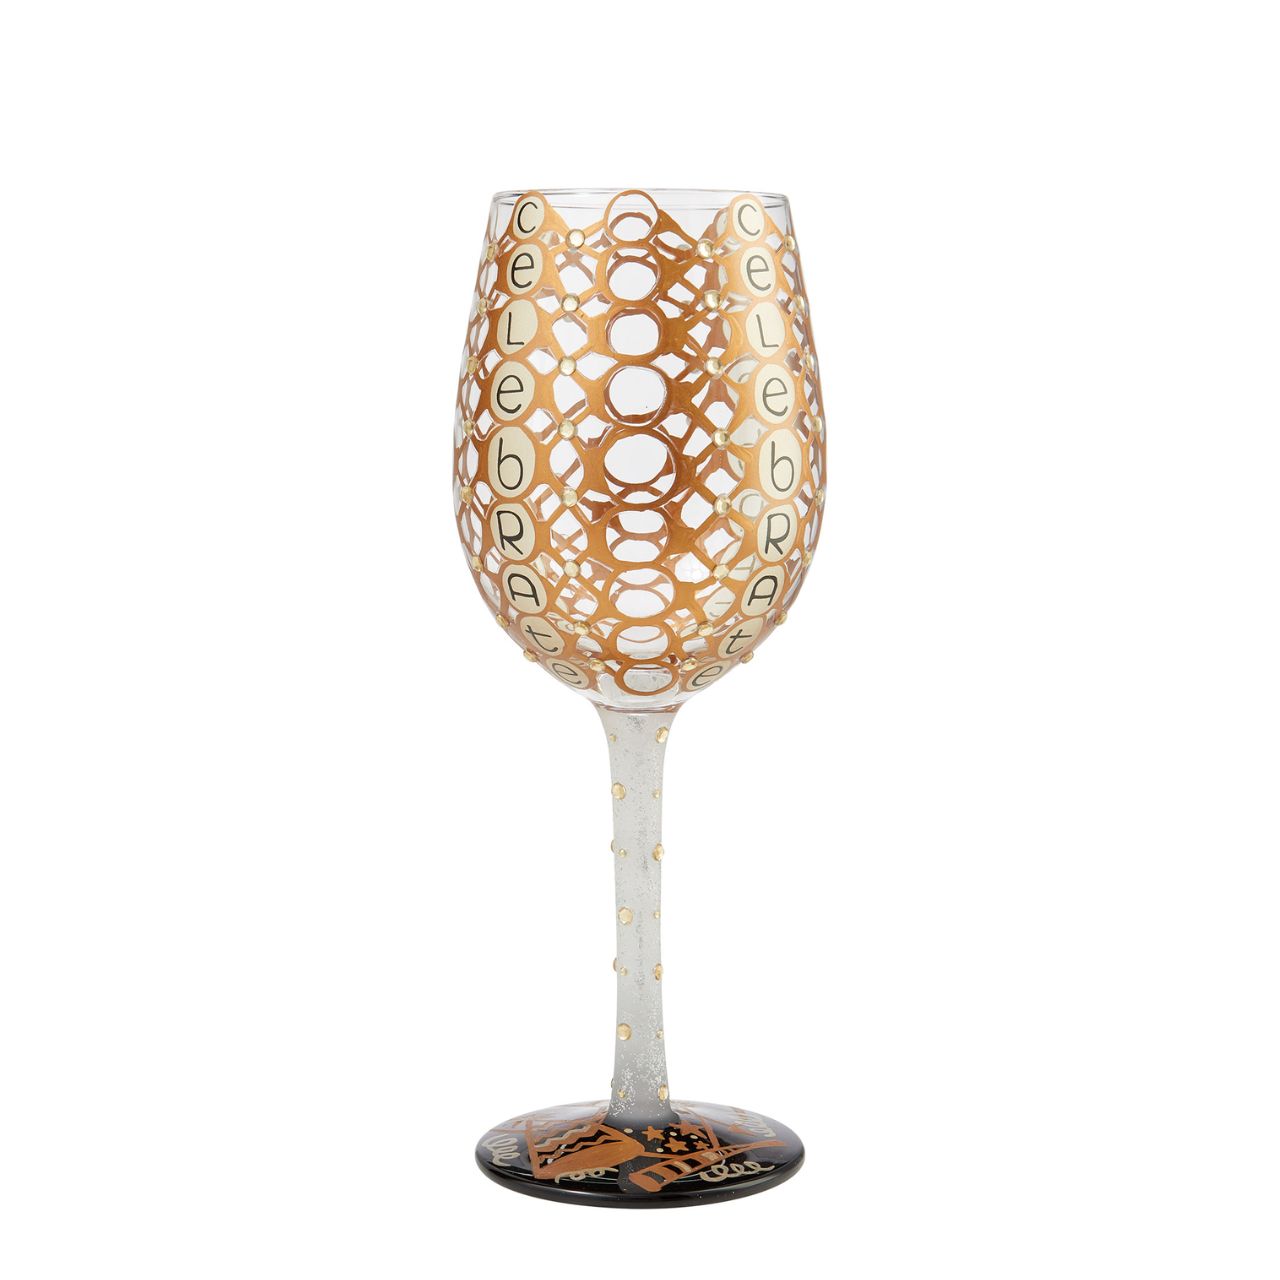 Celebrate Wine Glass by Lolita  Celebrate in style with this super glittery wine glass. Whatever the celebratory occasion, you'll be reaching for this glass, time and time again. Hand wash only. Securely packaged in a beautiful, decorative gift box.